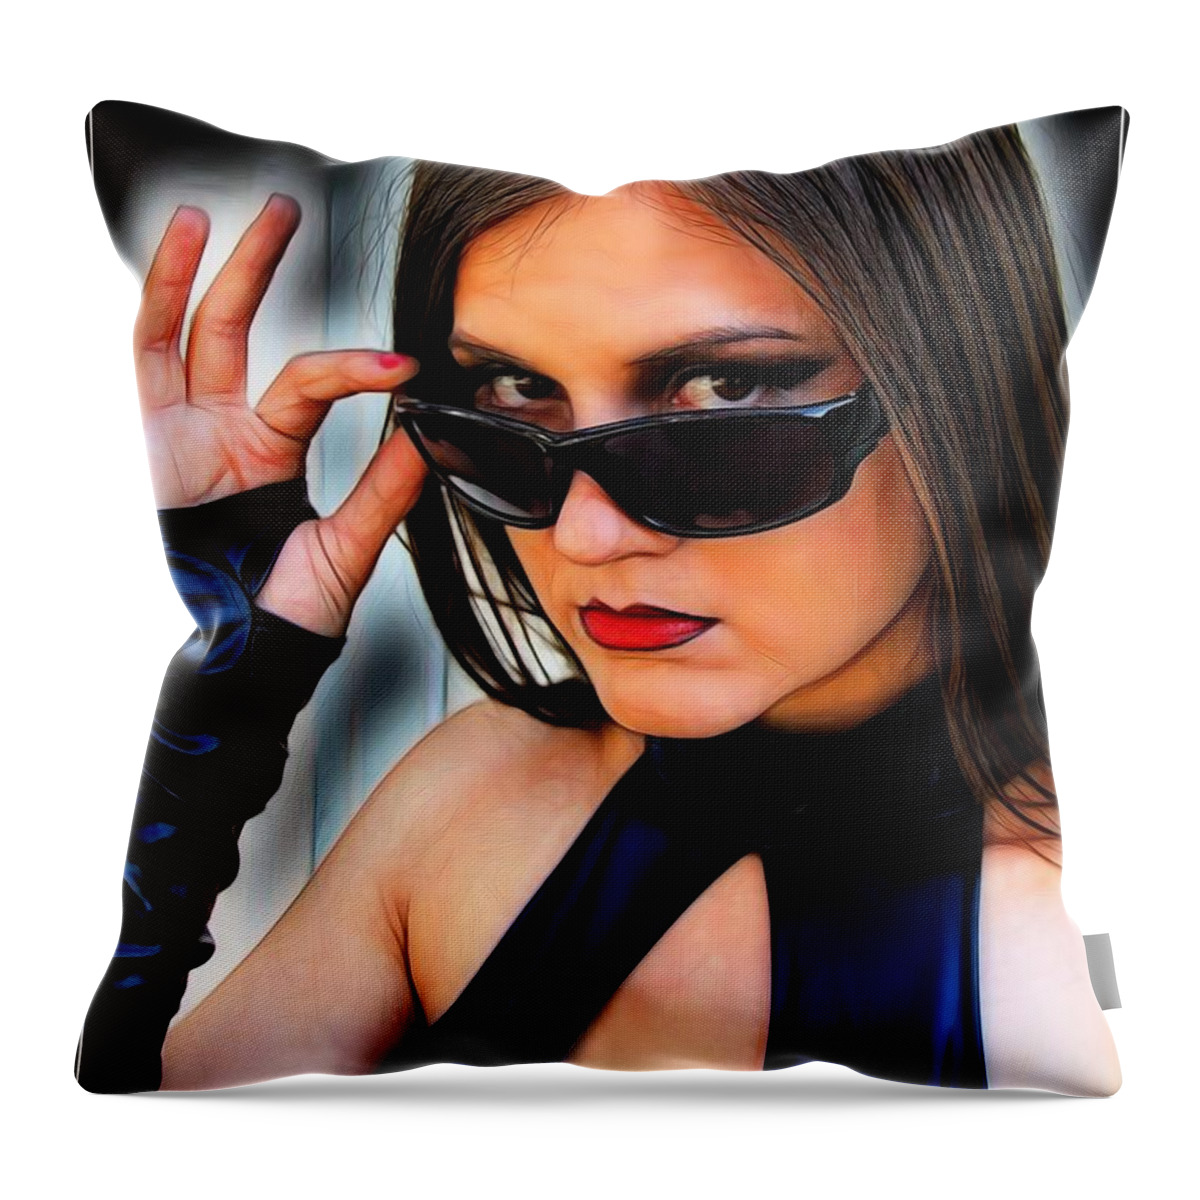 Fantasy Throw Pillow featuring the painting Portrait Of A Tomb Raider #1 by Jon Volden